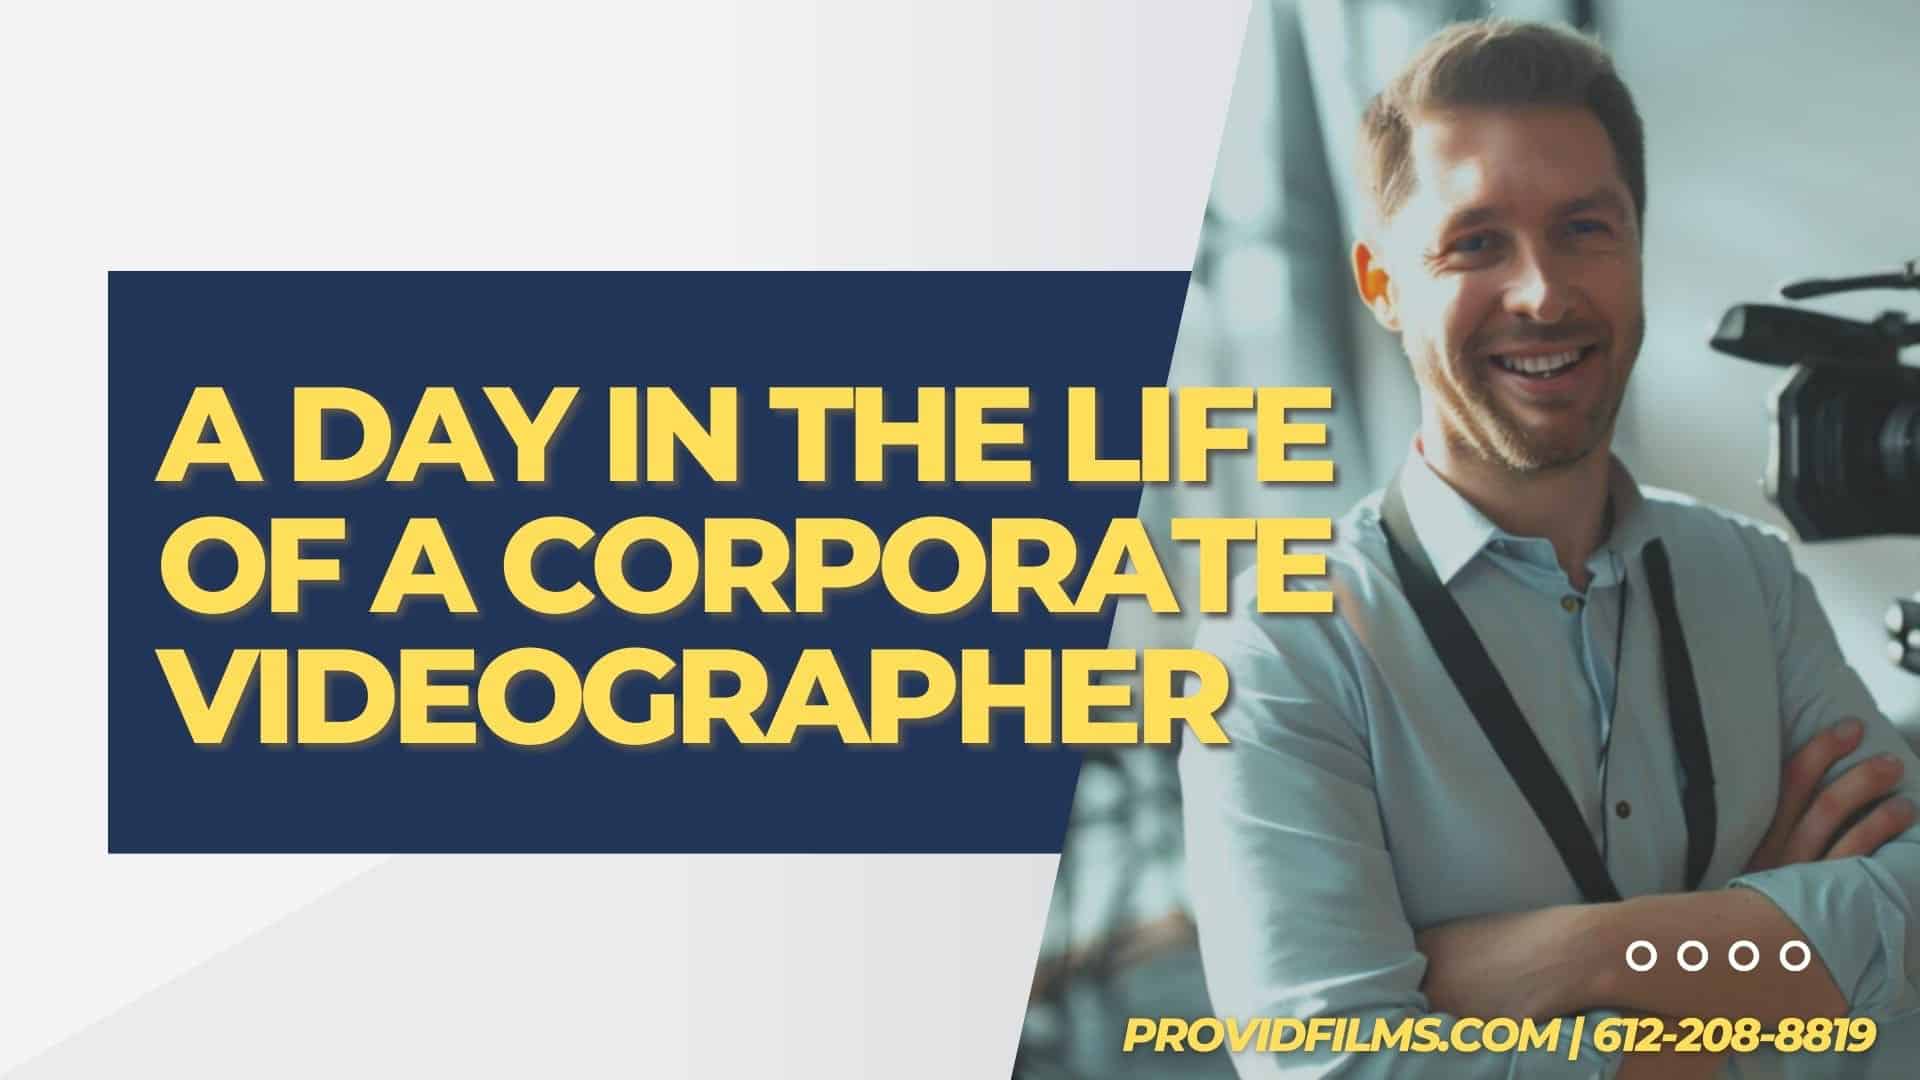 Graphic of a corporate videographer and text saying "A Day in the Life of a Corporate Videographer"